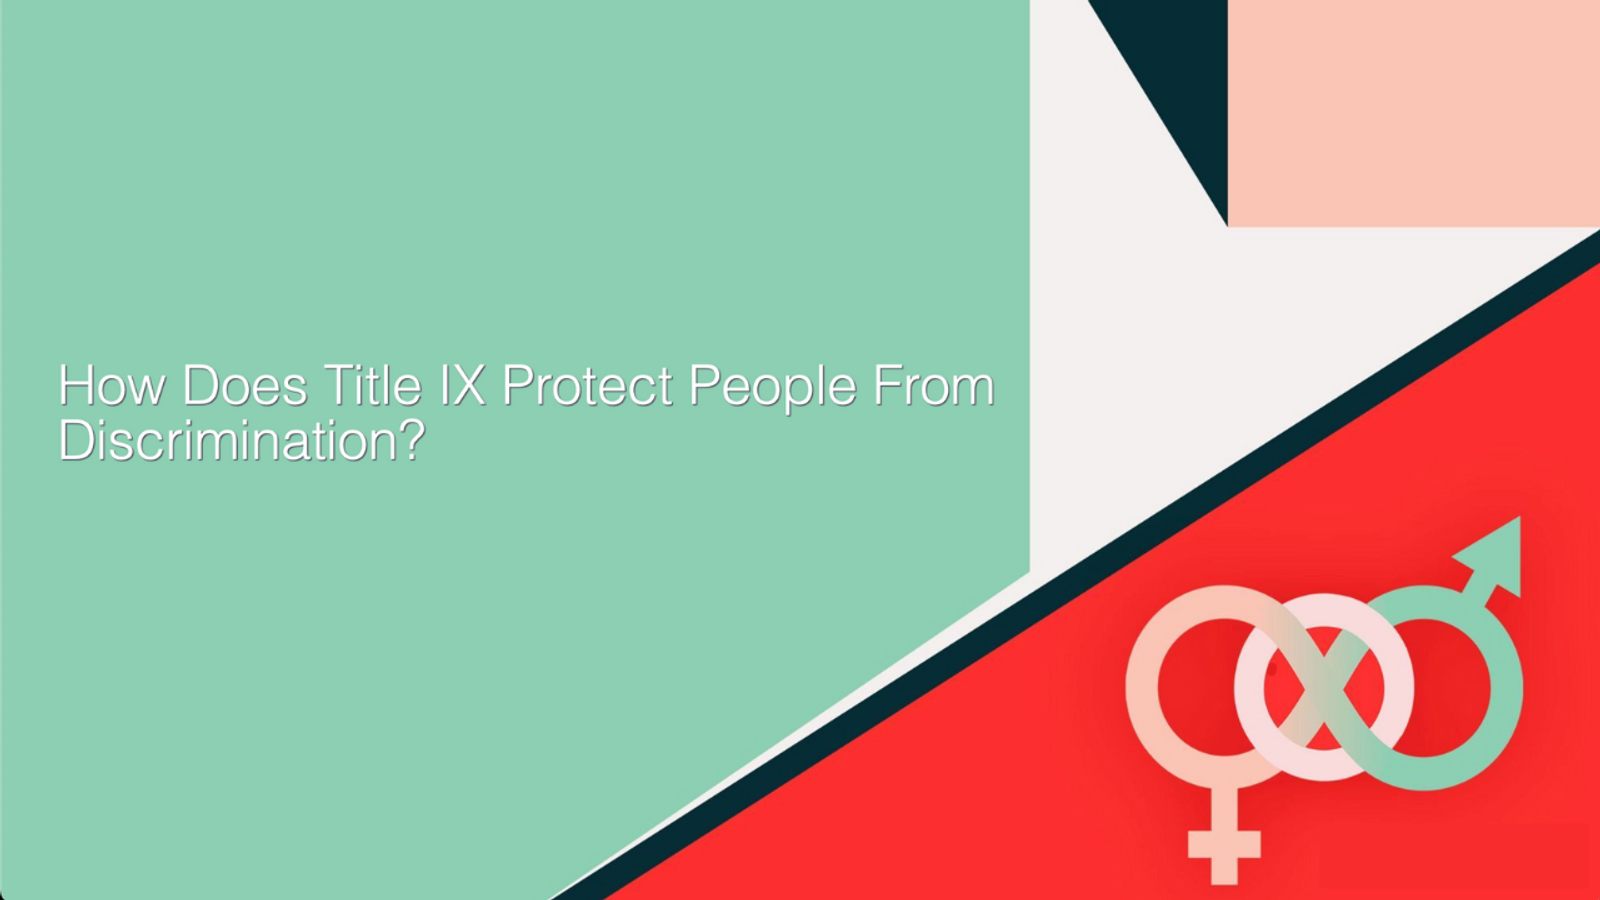 How does Title IX Protect People From Discrimination?